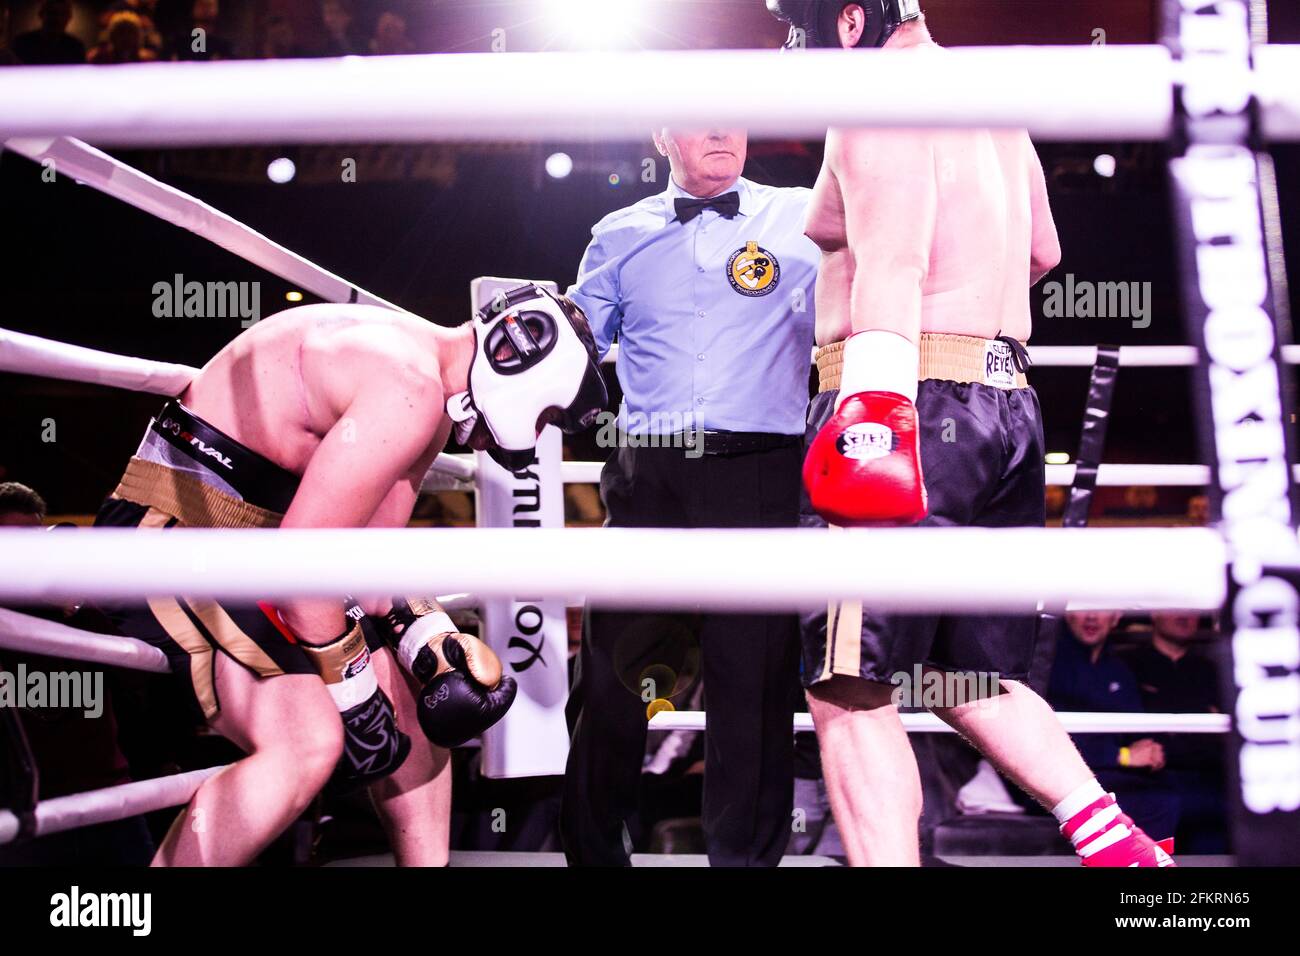 Boxing referee stops the fight as one of the boxers goes down after heavy body punch, gulping for air in pain during White Collars event in Freedom Stock Photo